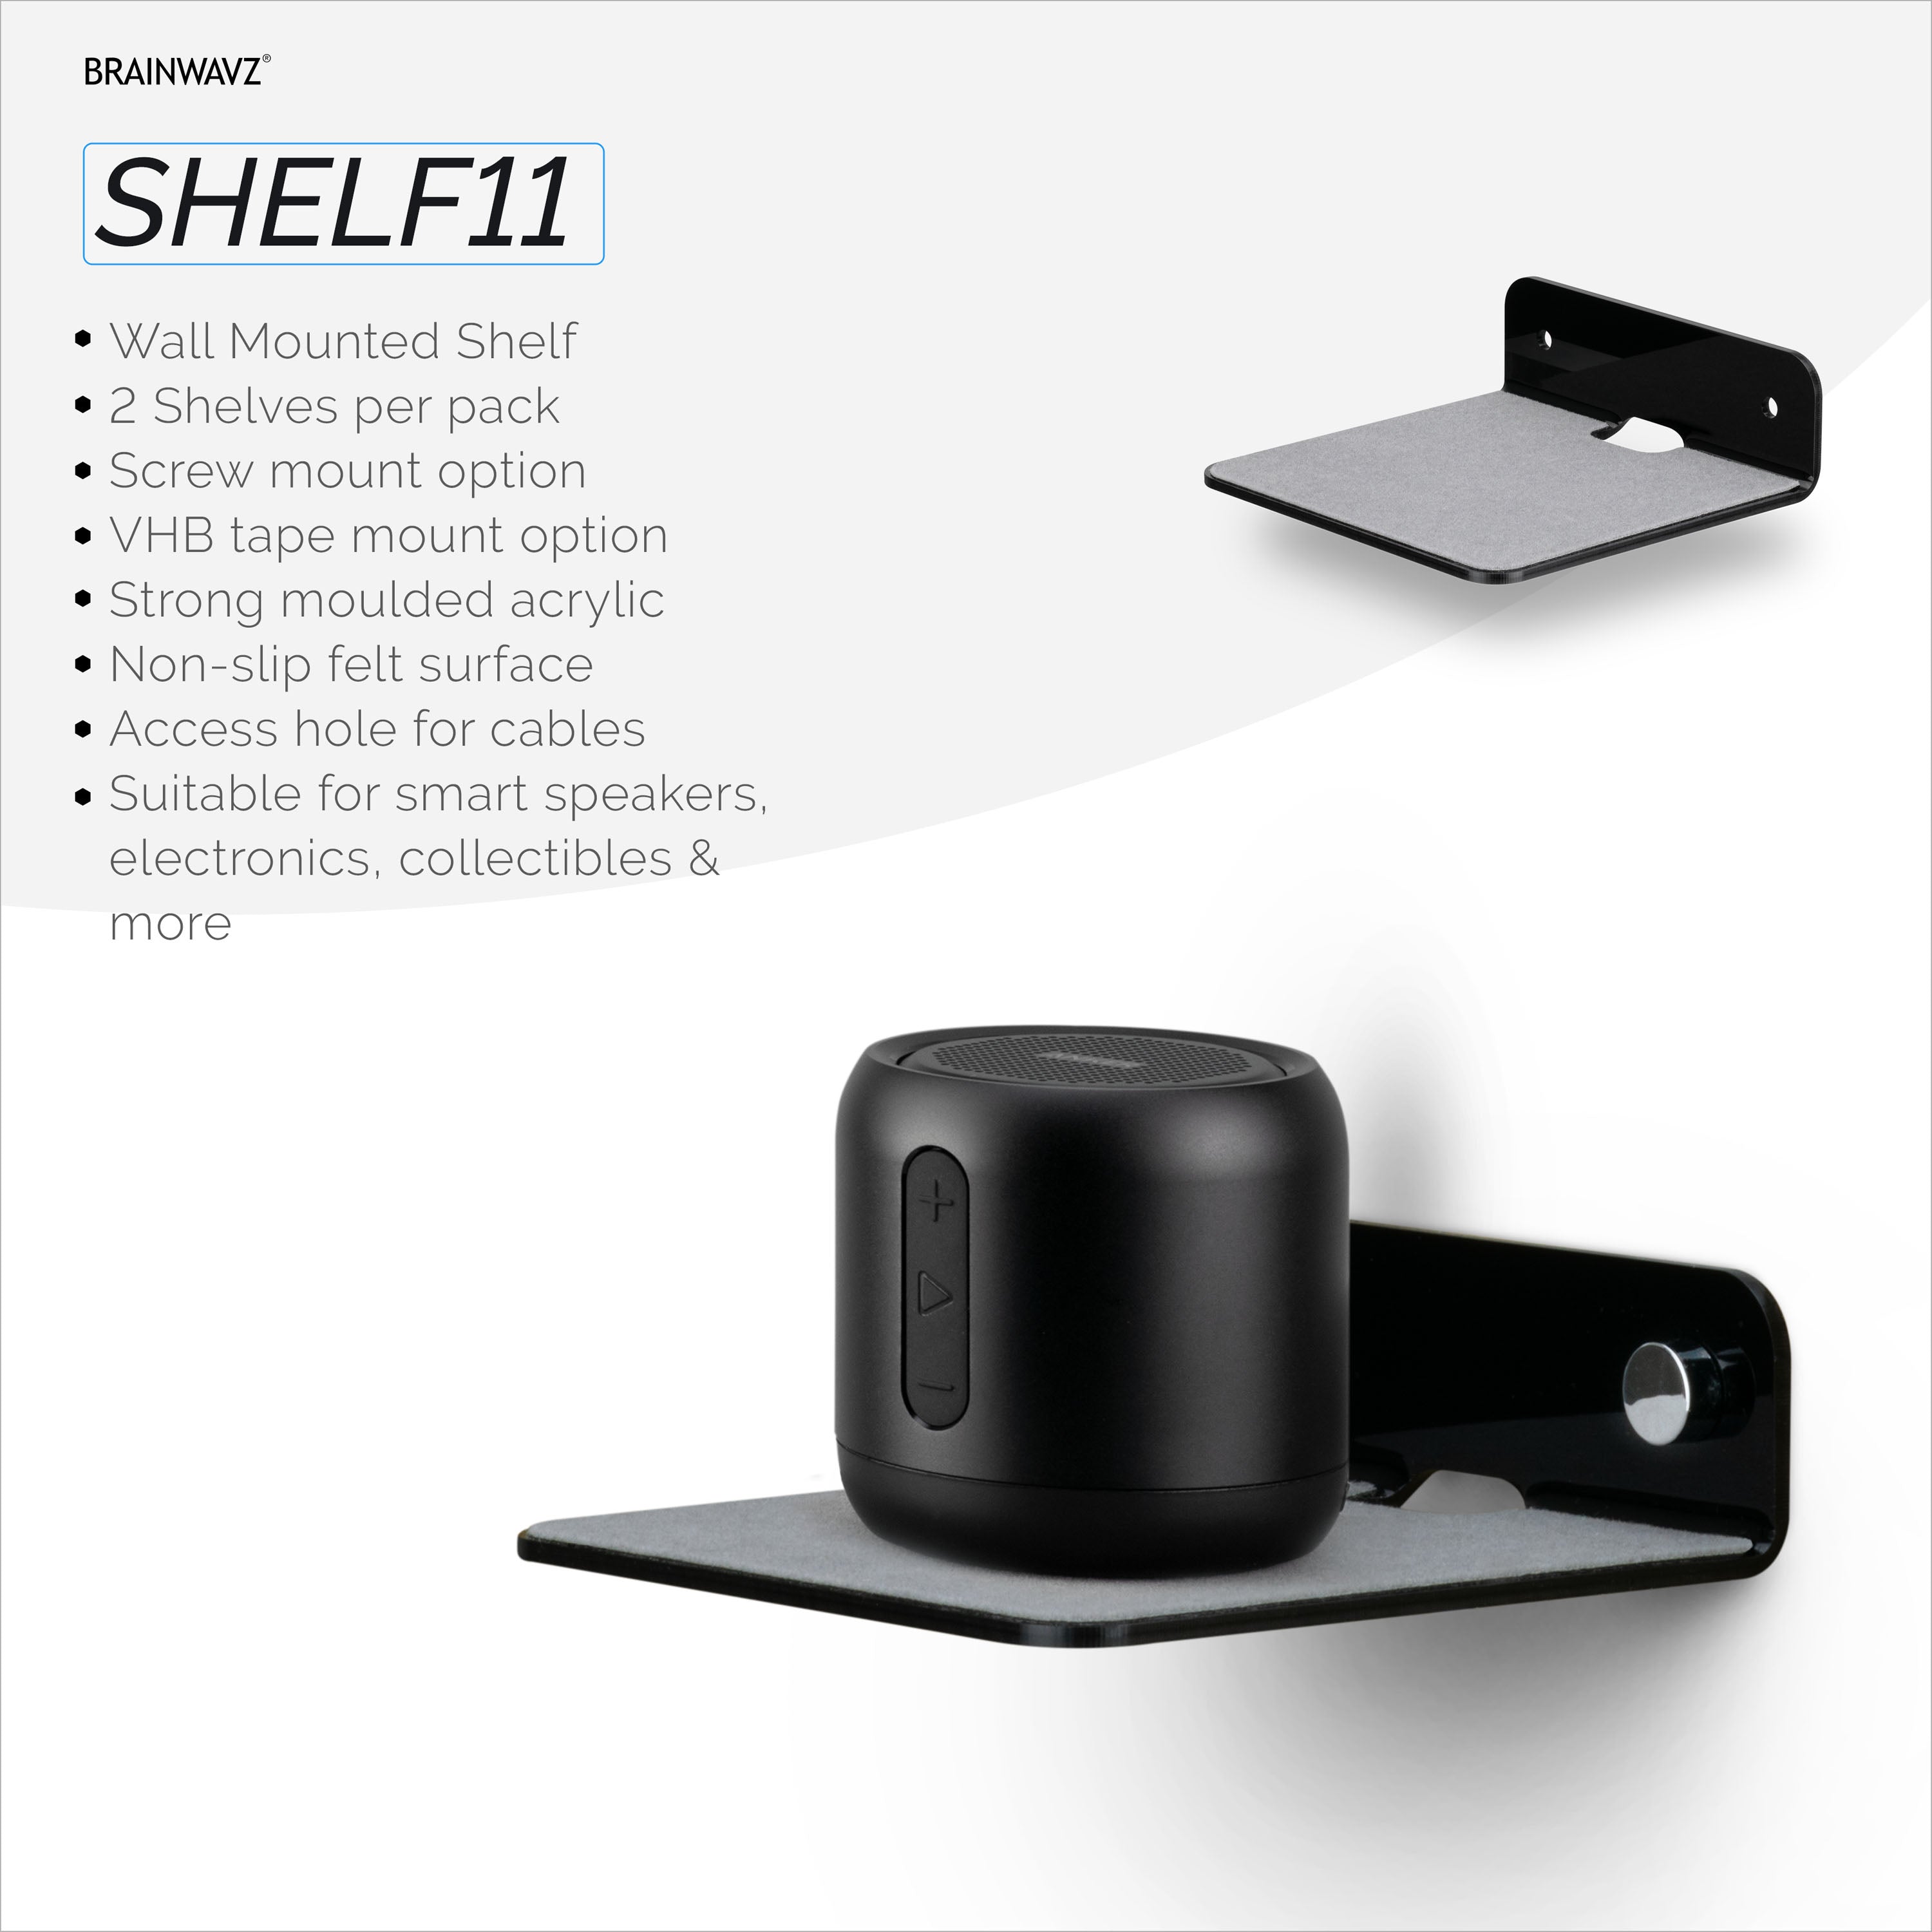 Mini Corner Shelf Mount for Security Cameras, Baby Monitors, Speakers, Plants & More, Universal Holder, Strong Adheasive, Easy to Install, No Mes